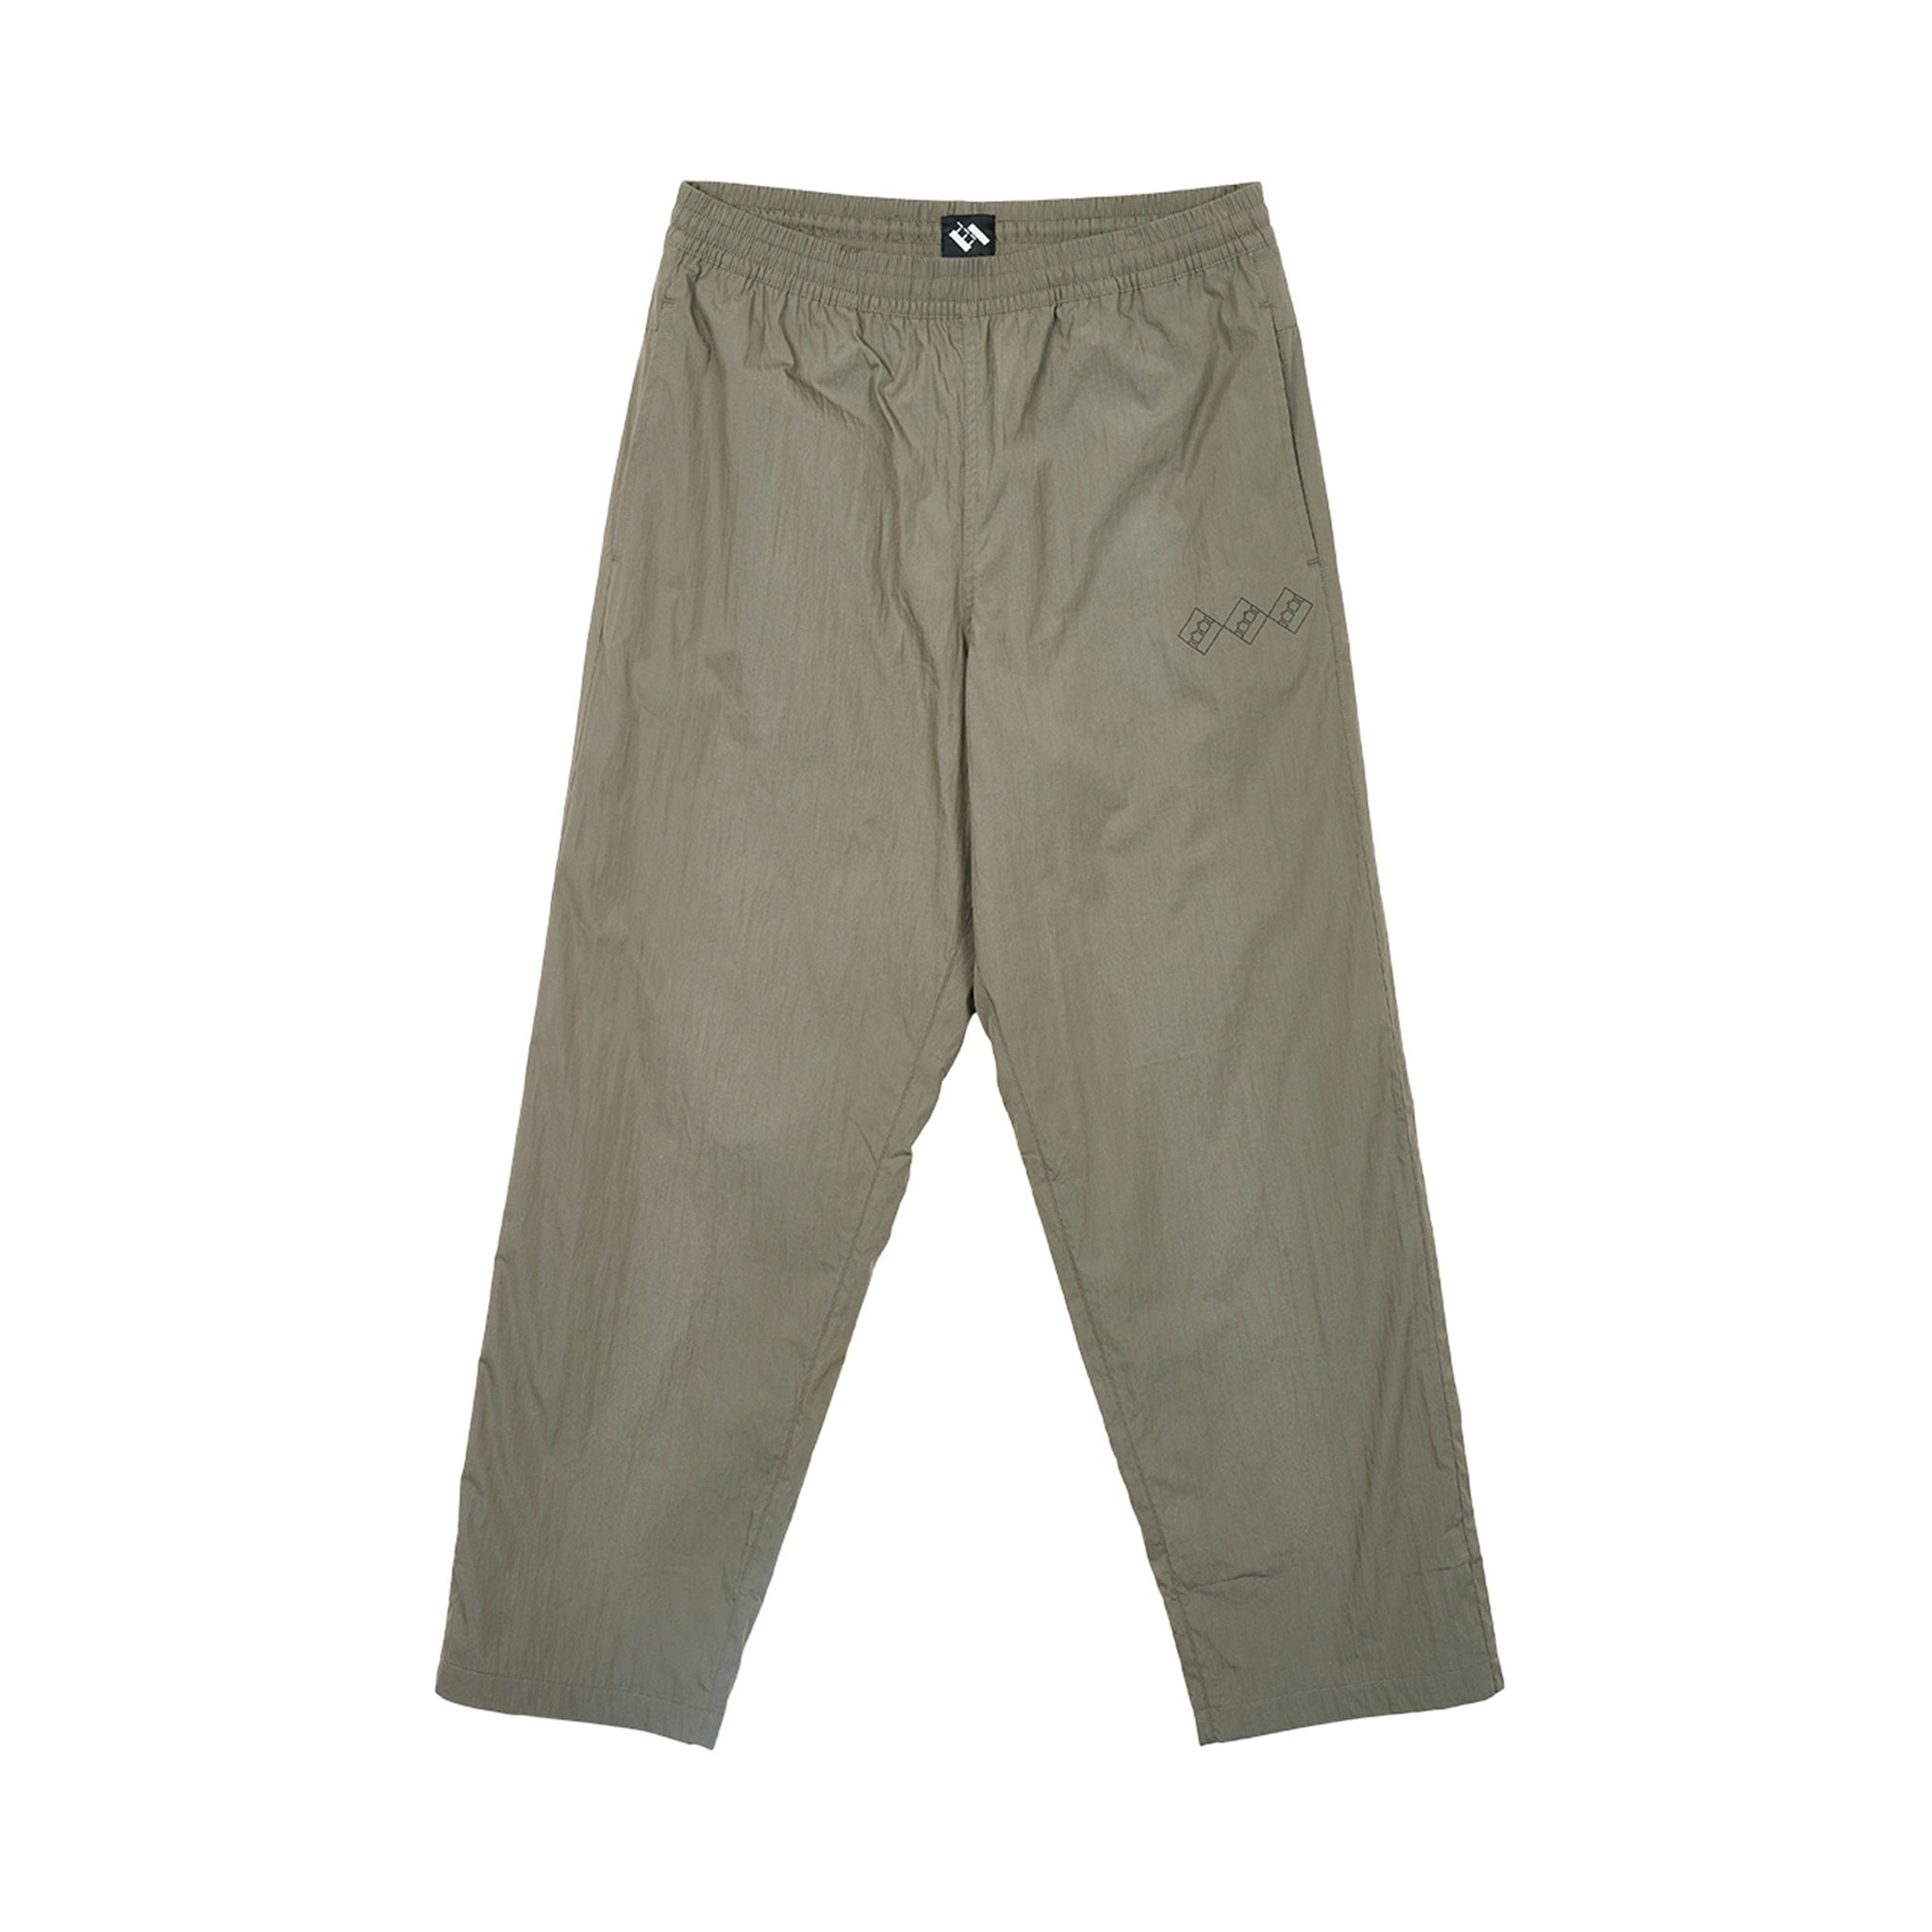 The Trilogy Tapes Tech Fabric Beach Pants Charcoal